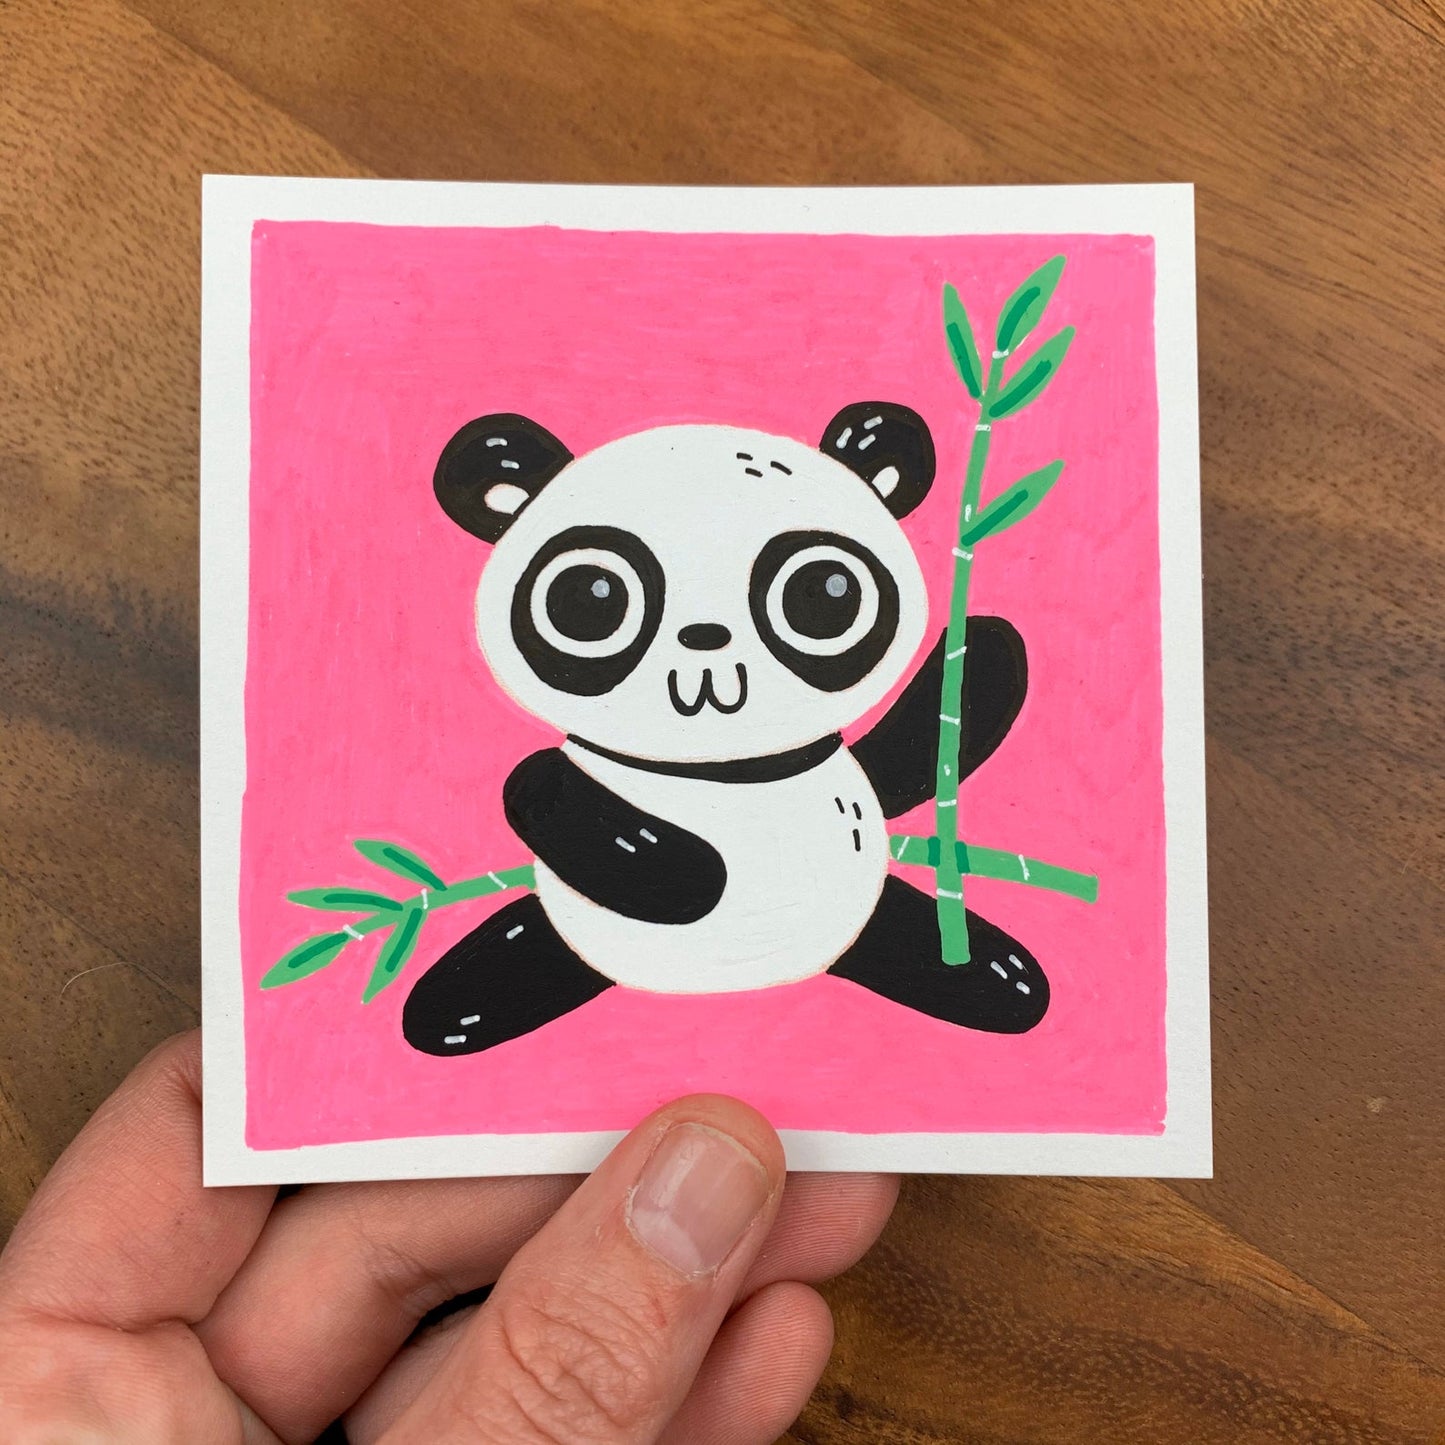 Original artwork of a cute panda bear holding a bamboo on a bright pink background. Materials used: Uni-Posca paint markers.